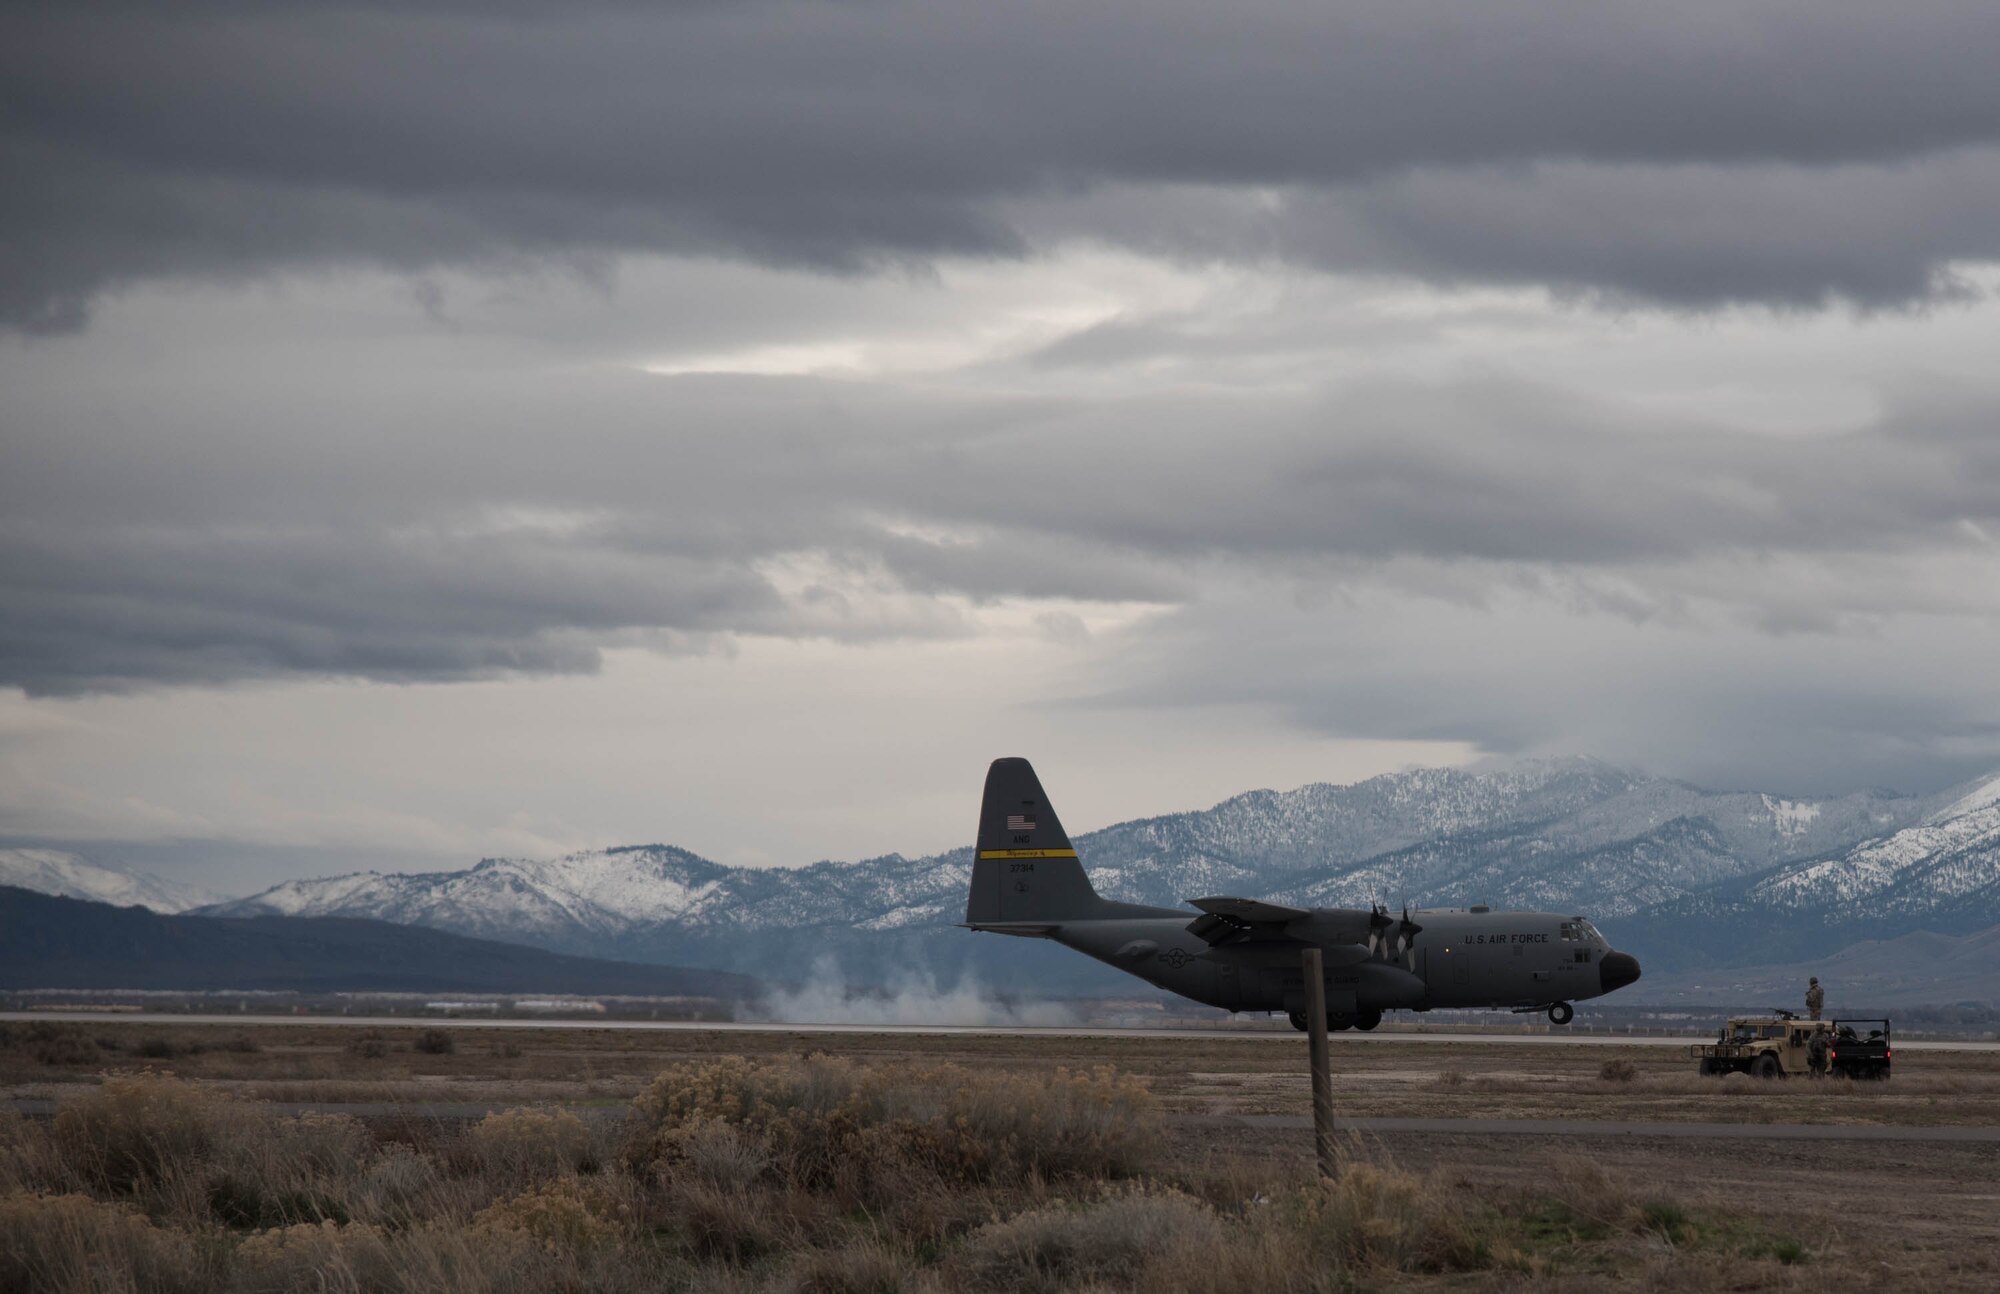 A Wyoming Air National Guard C-130 delivers cargo to Amedee Army Airfield, Calif., in support of Operation Lumberjack on March 8, 2016. The Kentucky Air National Guard’s 123rd Contingency Response Group is working in conjunction with the U.S. Army’s 688th Rapid Port Opening Element and a team from the Defense Logistics Agency to operate Joint Task Force-Port Opening Sangala during the week-long exercise. The objective of the JTF-PO is to establish an aerial port of debarkation, provide initial distribution capability and set up warehousing for distribution beyond a forward node. (Kentucky Air National Guard photo by 1st Lt. James Killen)